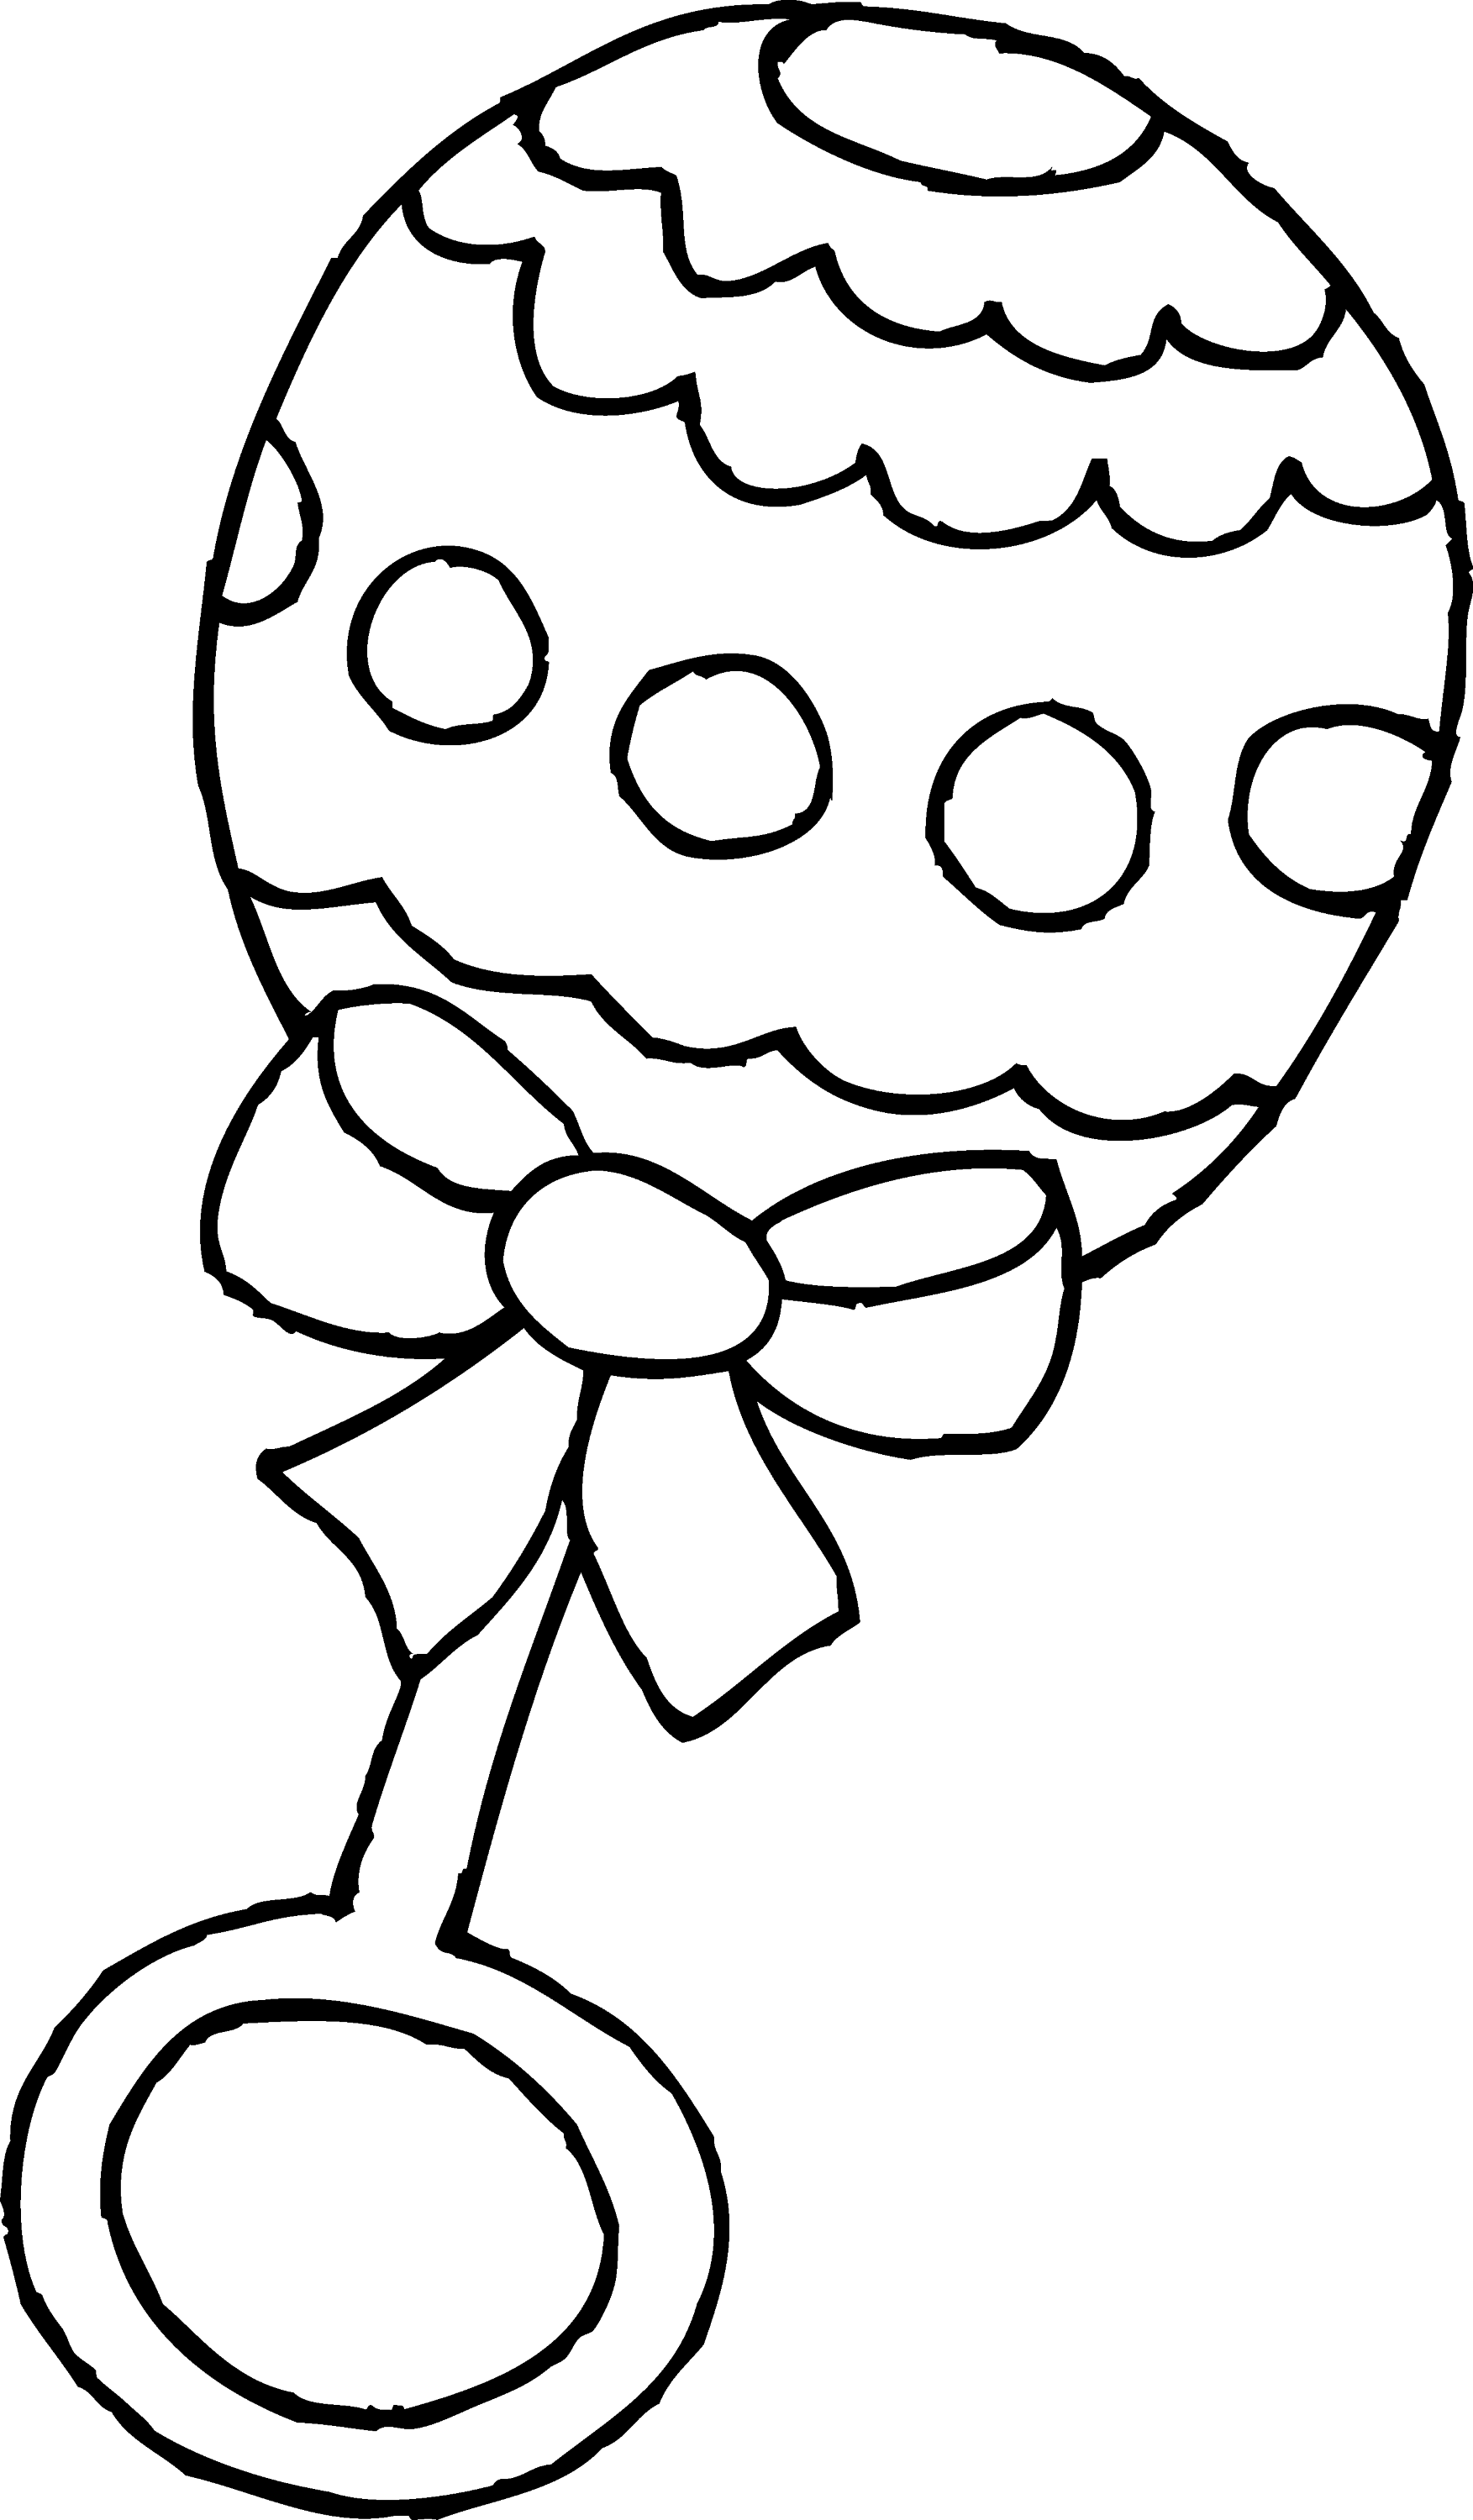 Baby Rattle Coloring Page